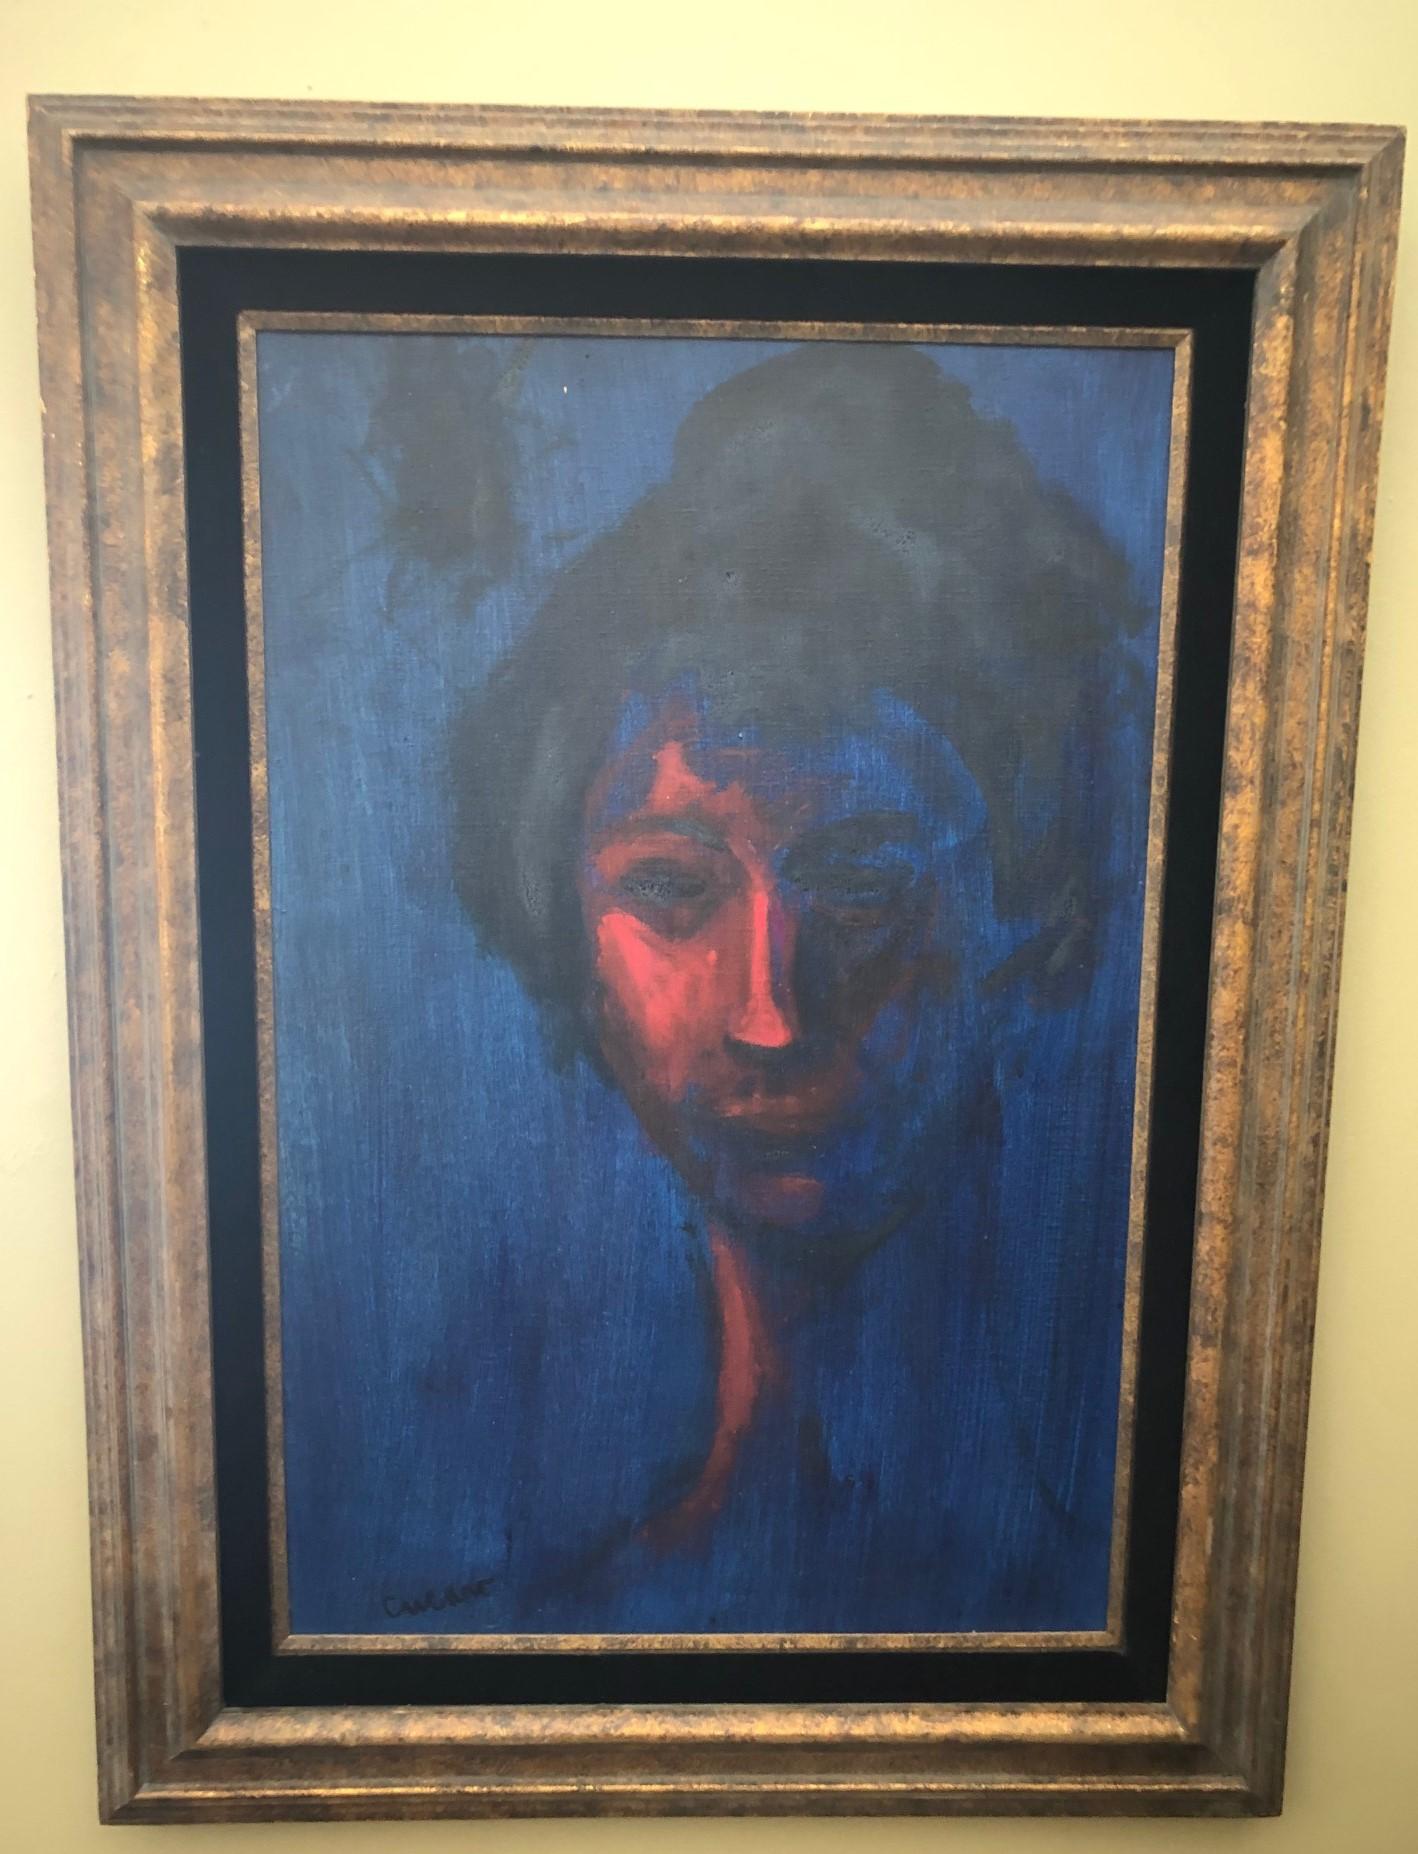 Beautiful original oil on canvas portrait of a young woman by listed artist Pascal Cucaro, circa 1960s. The piece measure 34